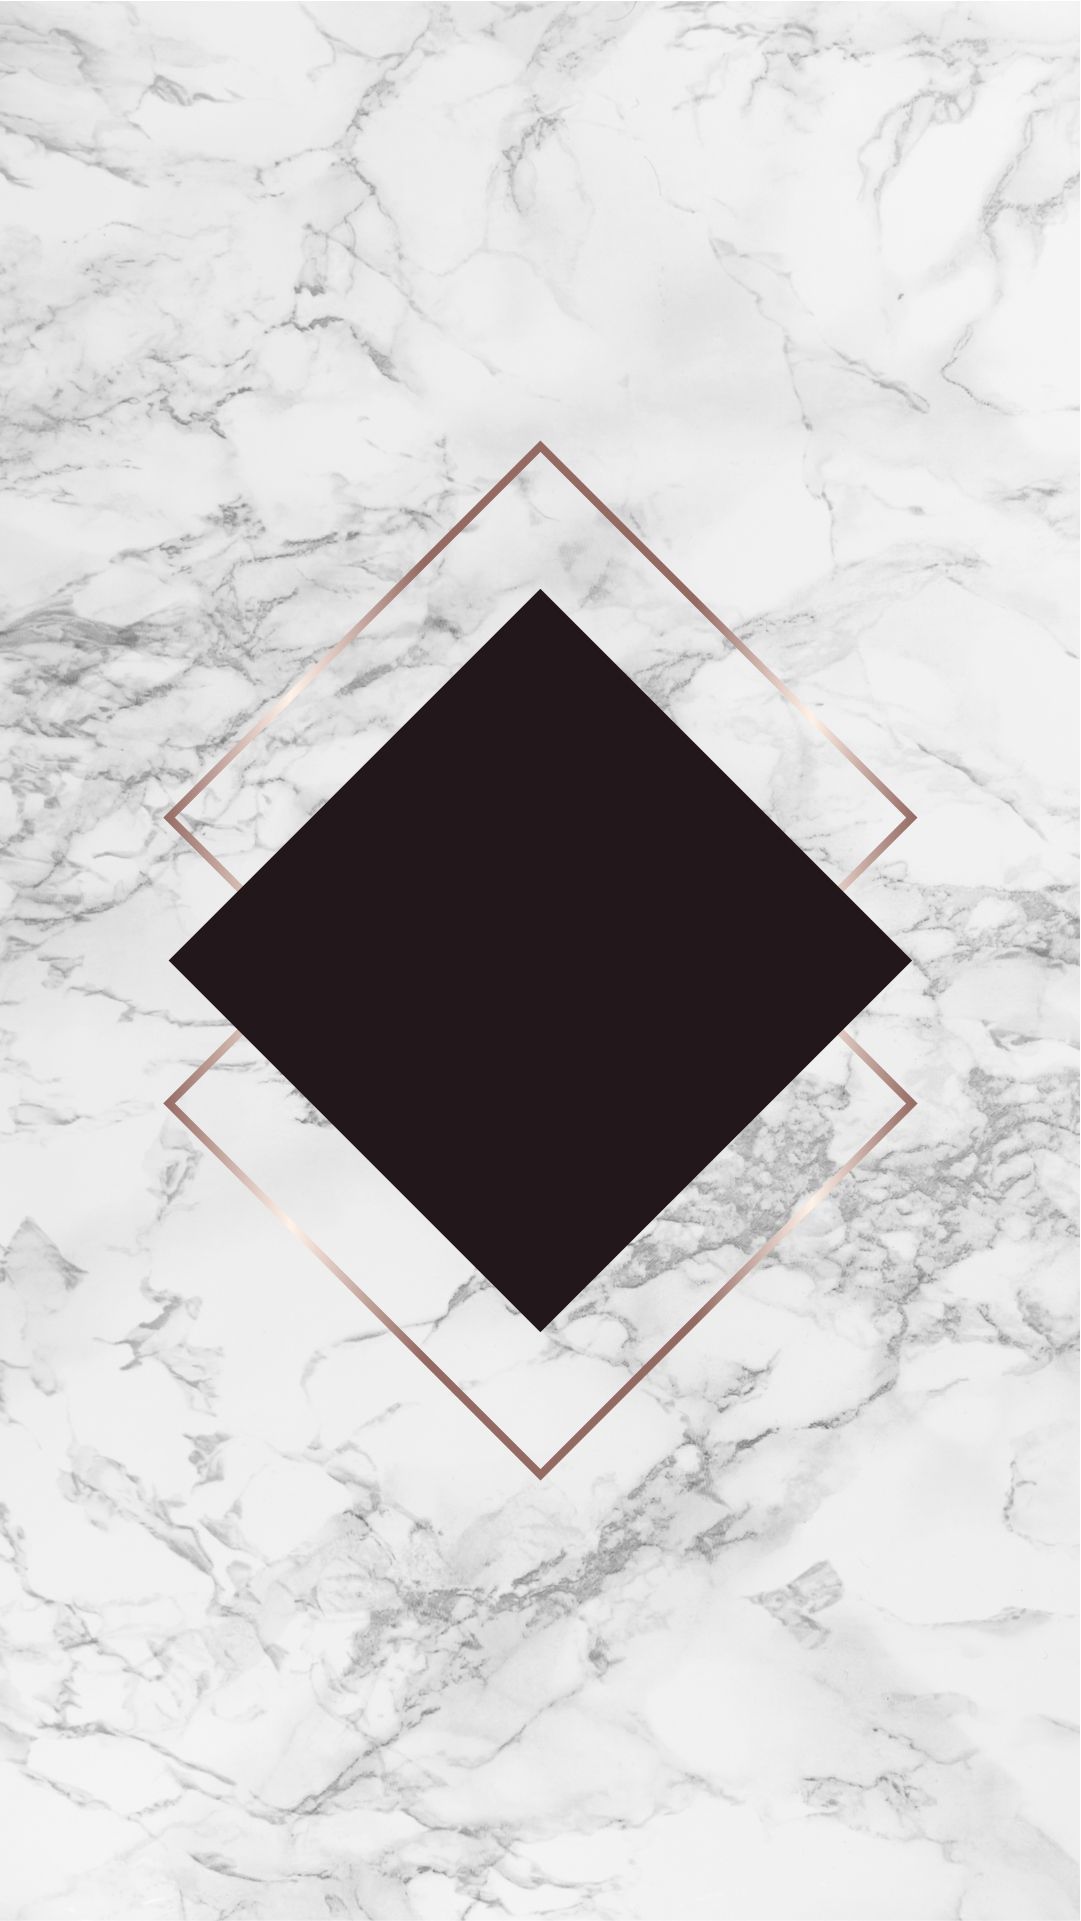 Black square in a rose gold frame on a white marble background - Marble